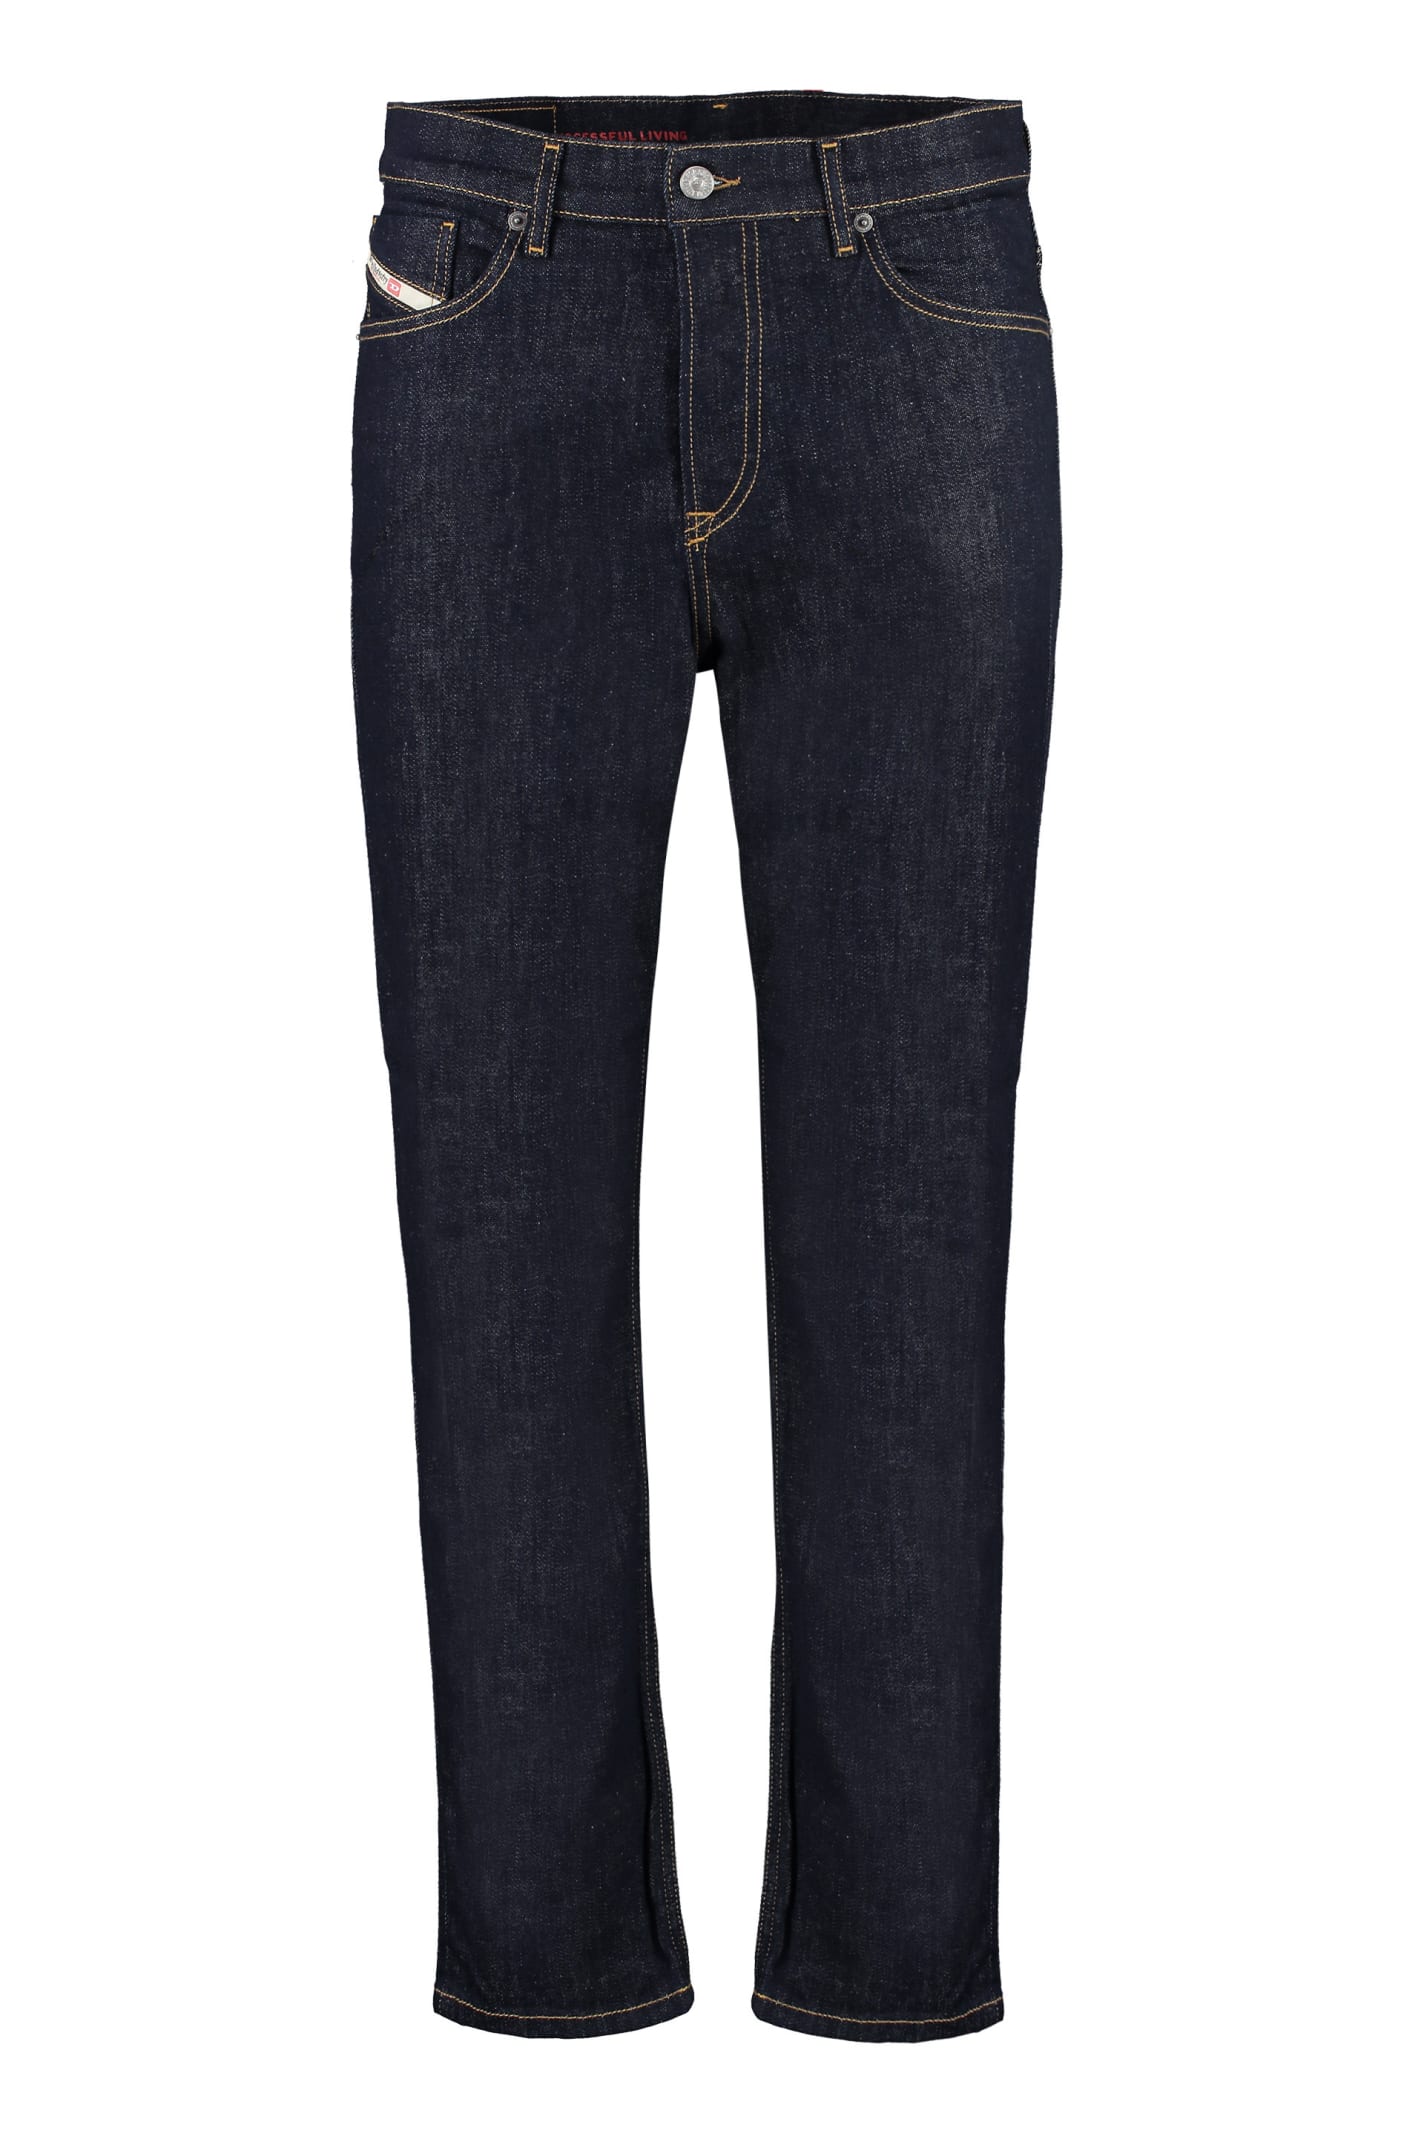 2005 D-fining Tapered Fit Jeans